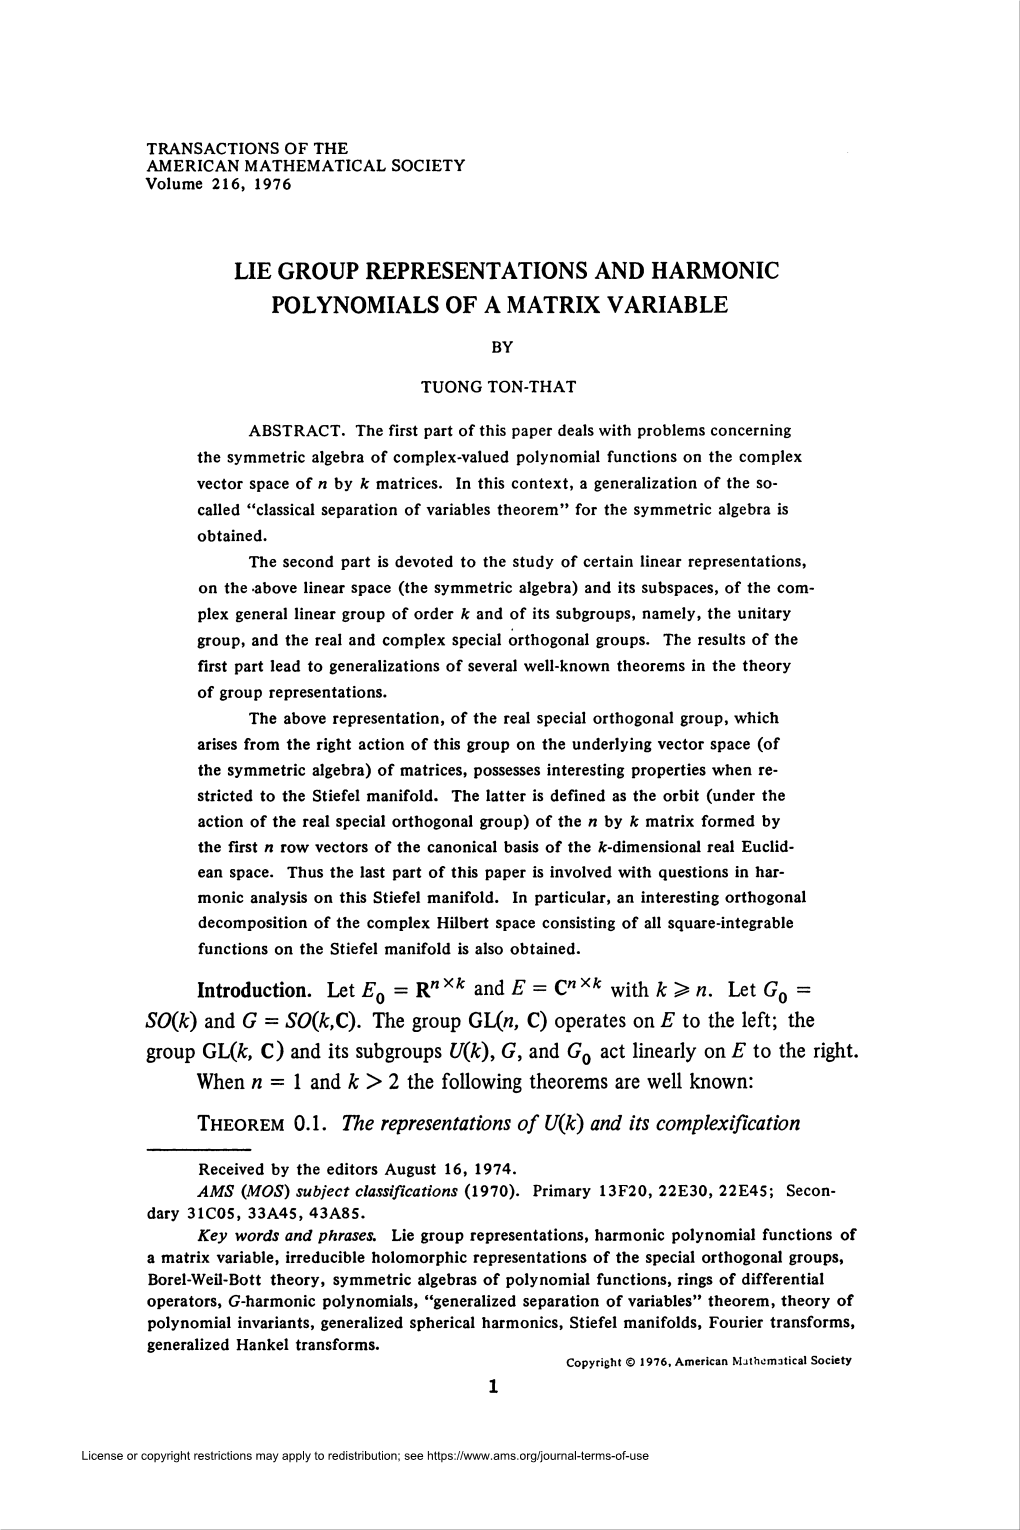 Lie Group Representations and Harmonic Polynomials of a Matrix Variable, Ph.D Dissertation, University of California, Irvine, 1974